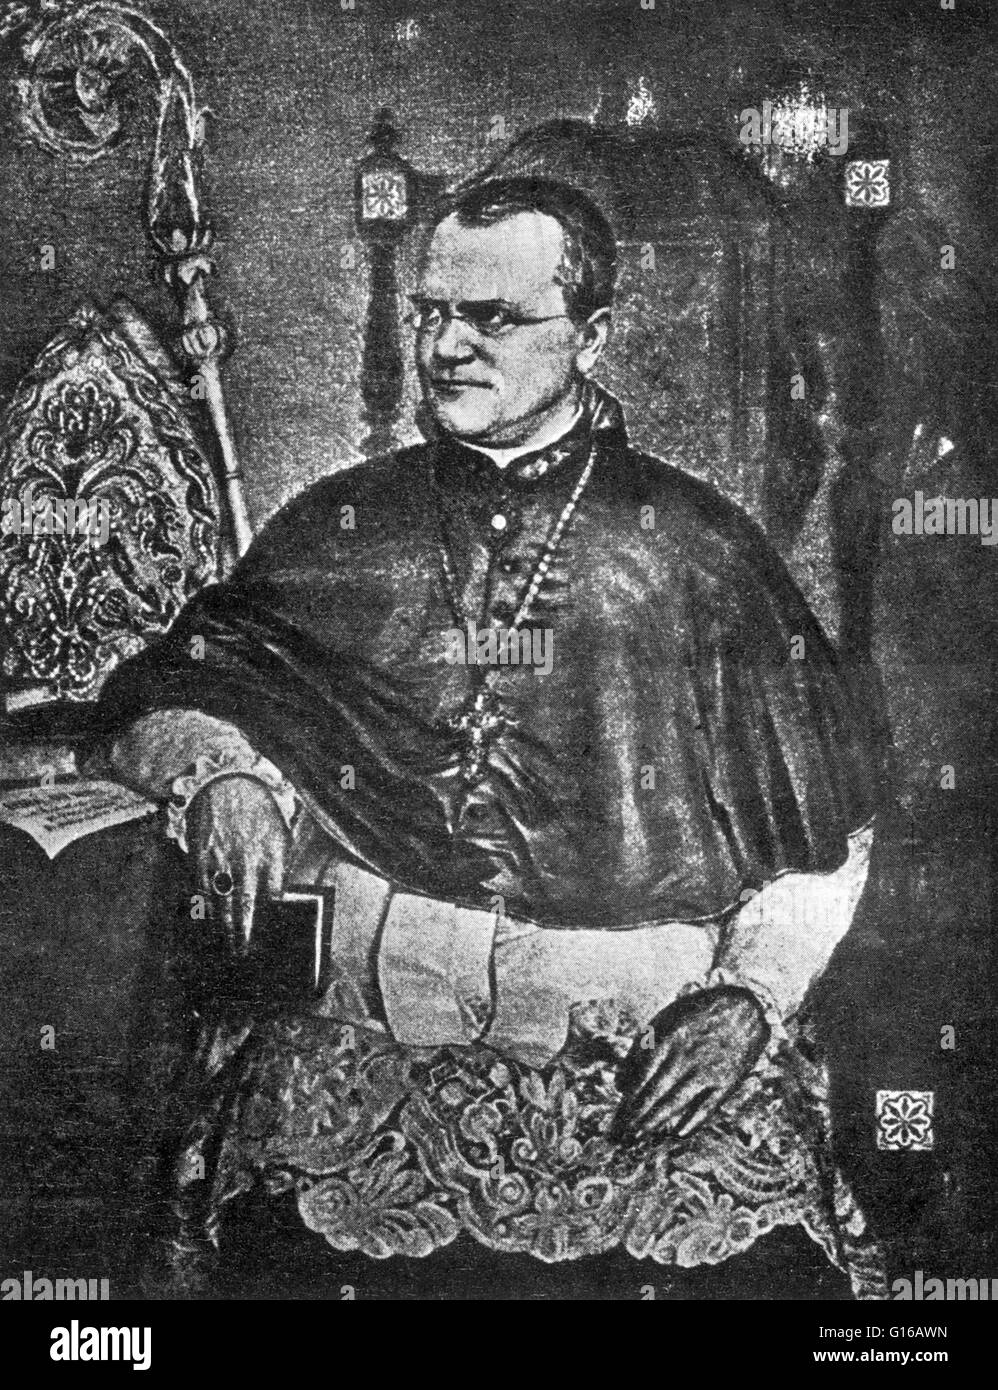 Gregor Johann Mendel (July 20, 1822 - January 6, 1884) was an Austrian scientist and Augustinian friar who gained posthumous fame as the founder of the new science of genetics. Mendel conducted experiments in a monastery in the 1860's with garden peas, wo Stock Photo